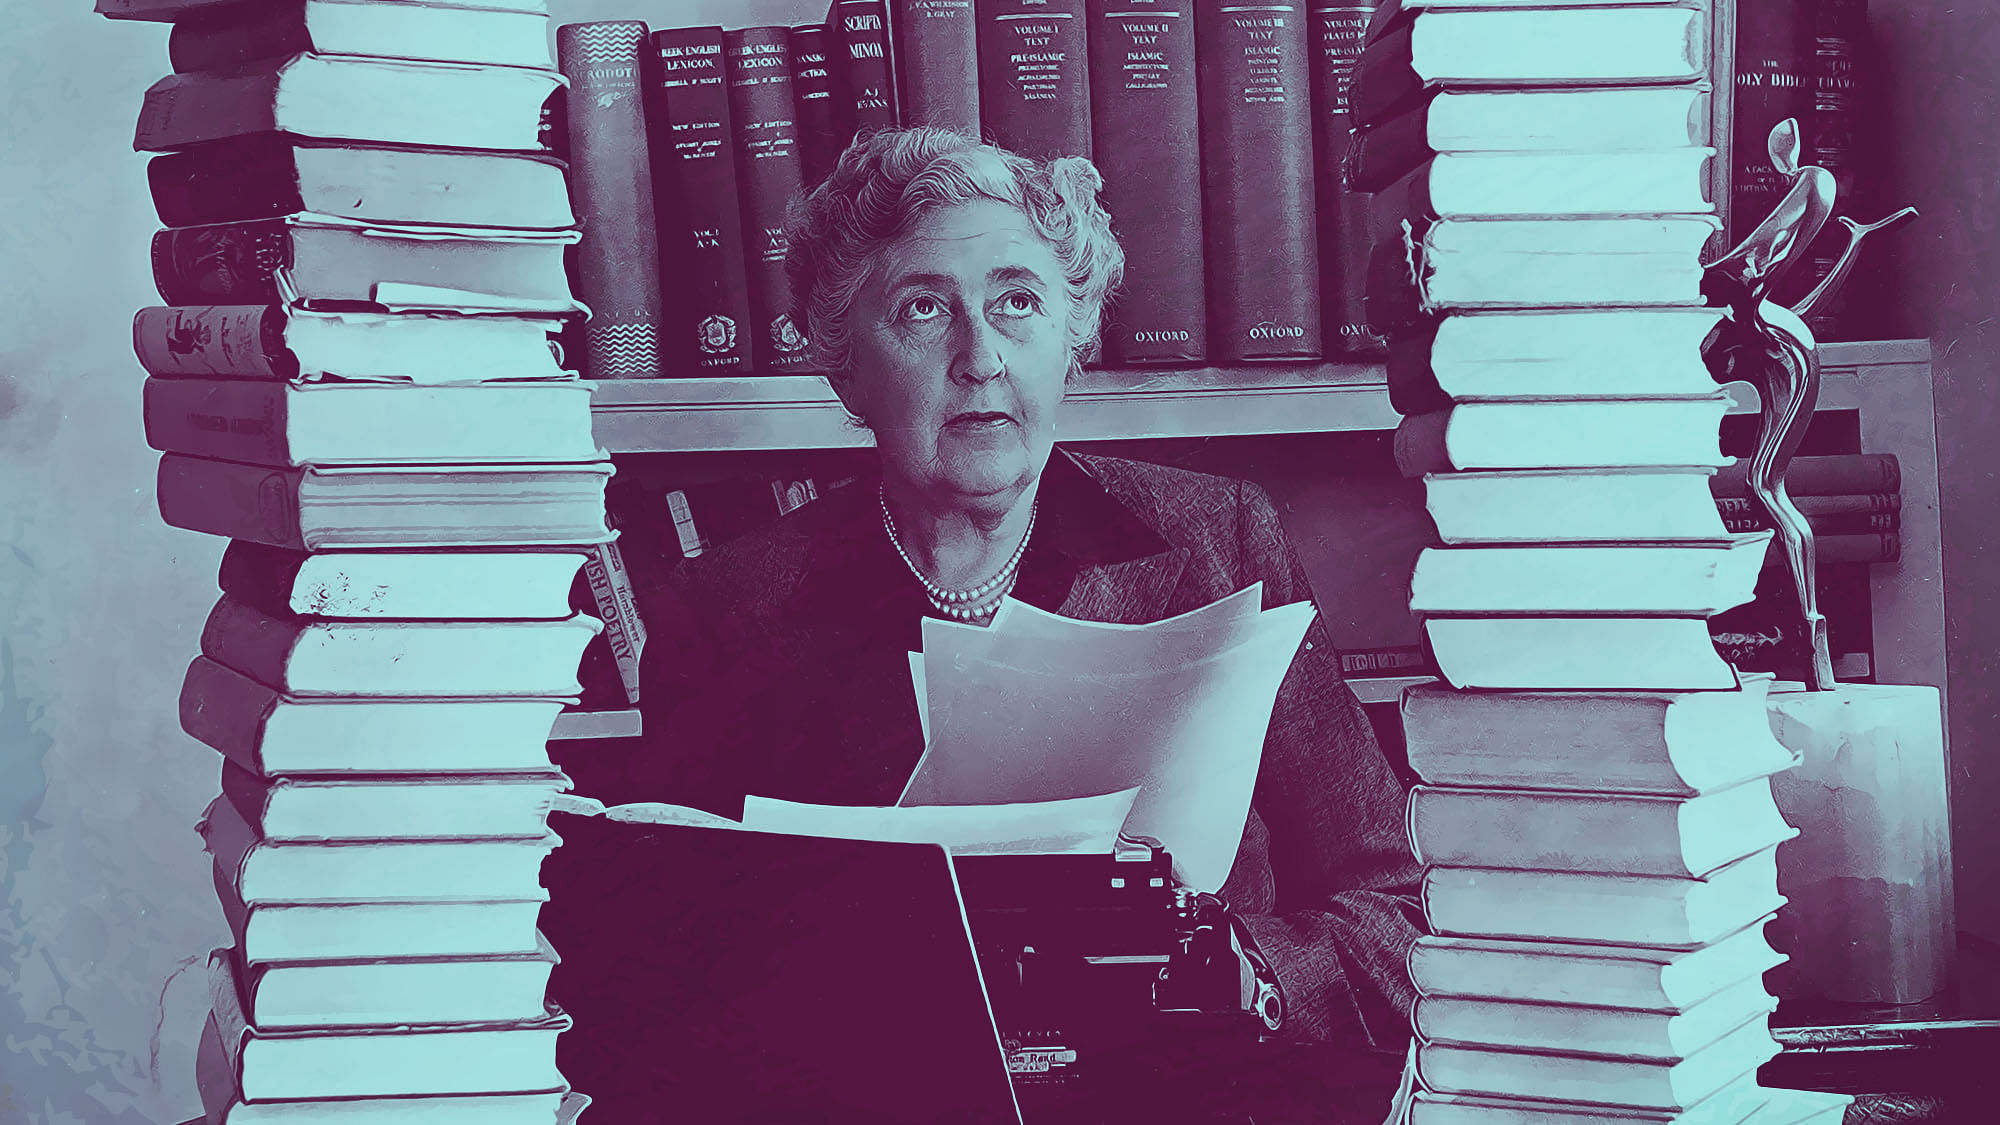 Crime novelist Agatha Christie disappeared for 11 days, in the year 1926.